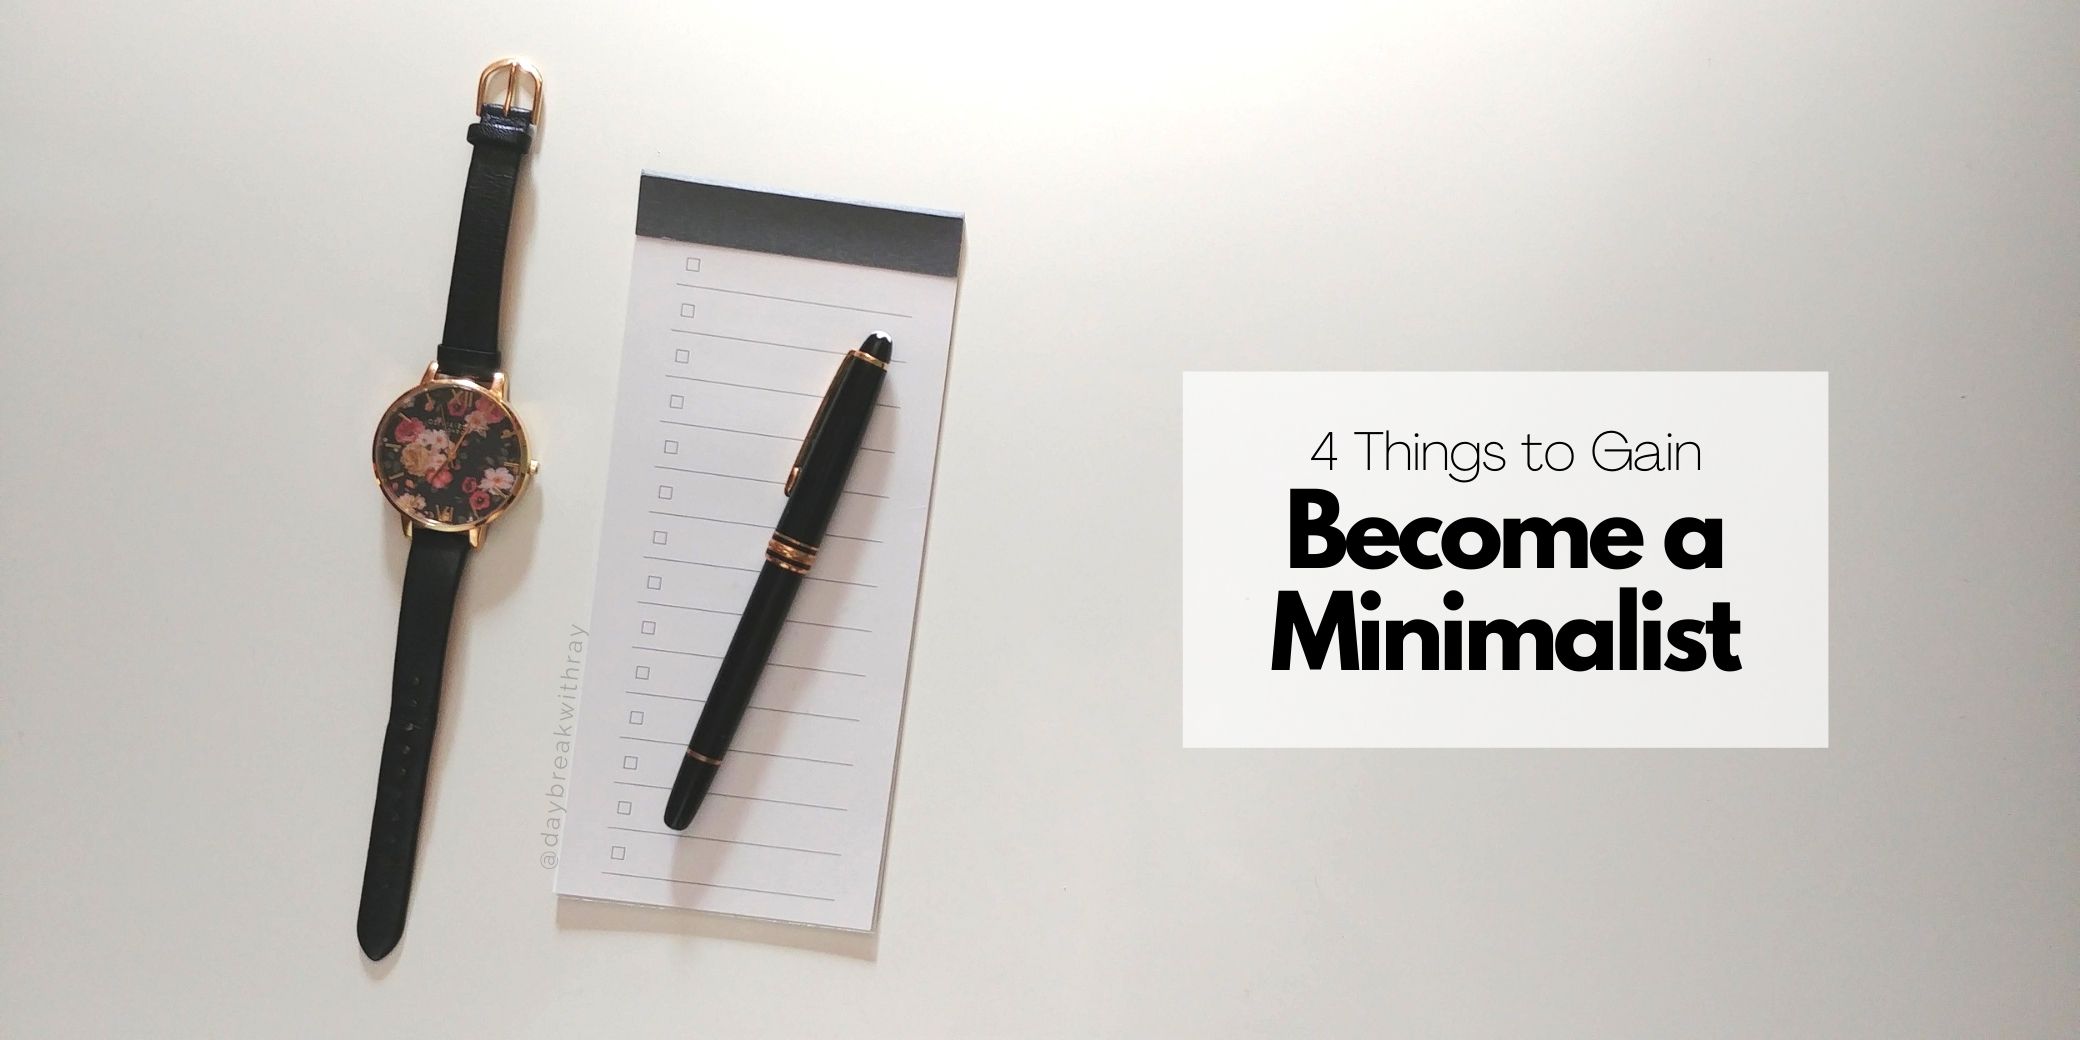 (Featured Image) Gain More of These 4 Things as a Minimalist